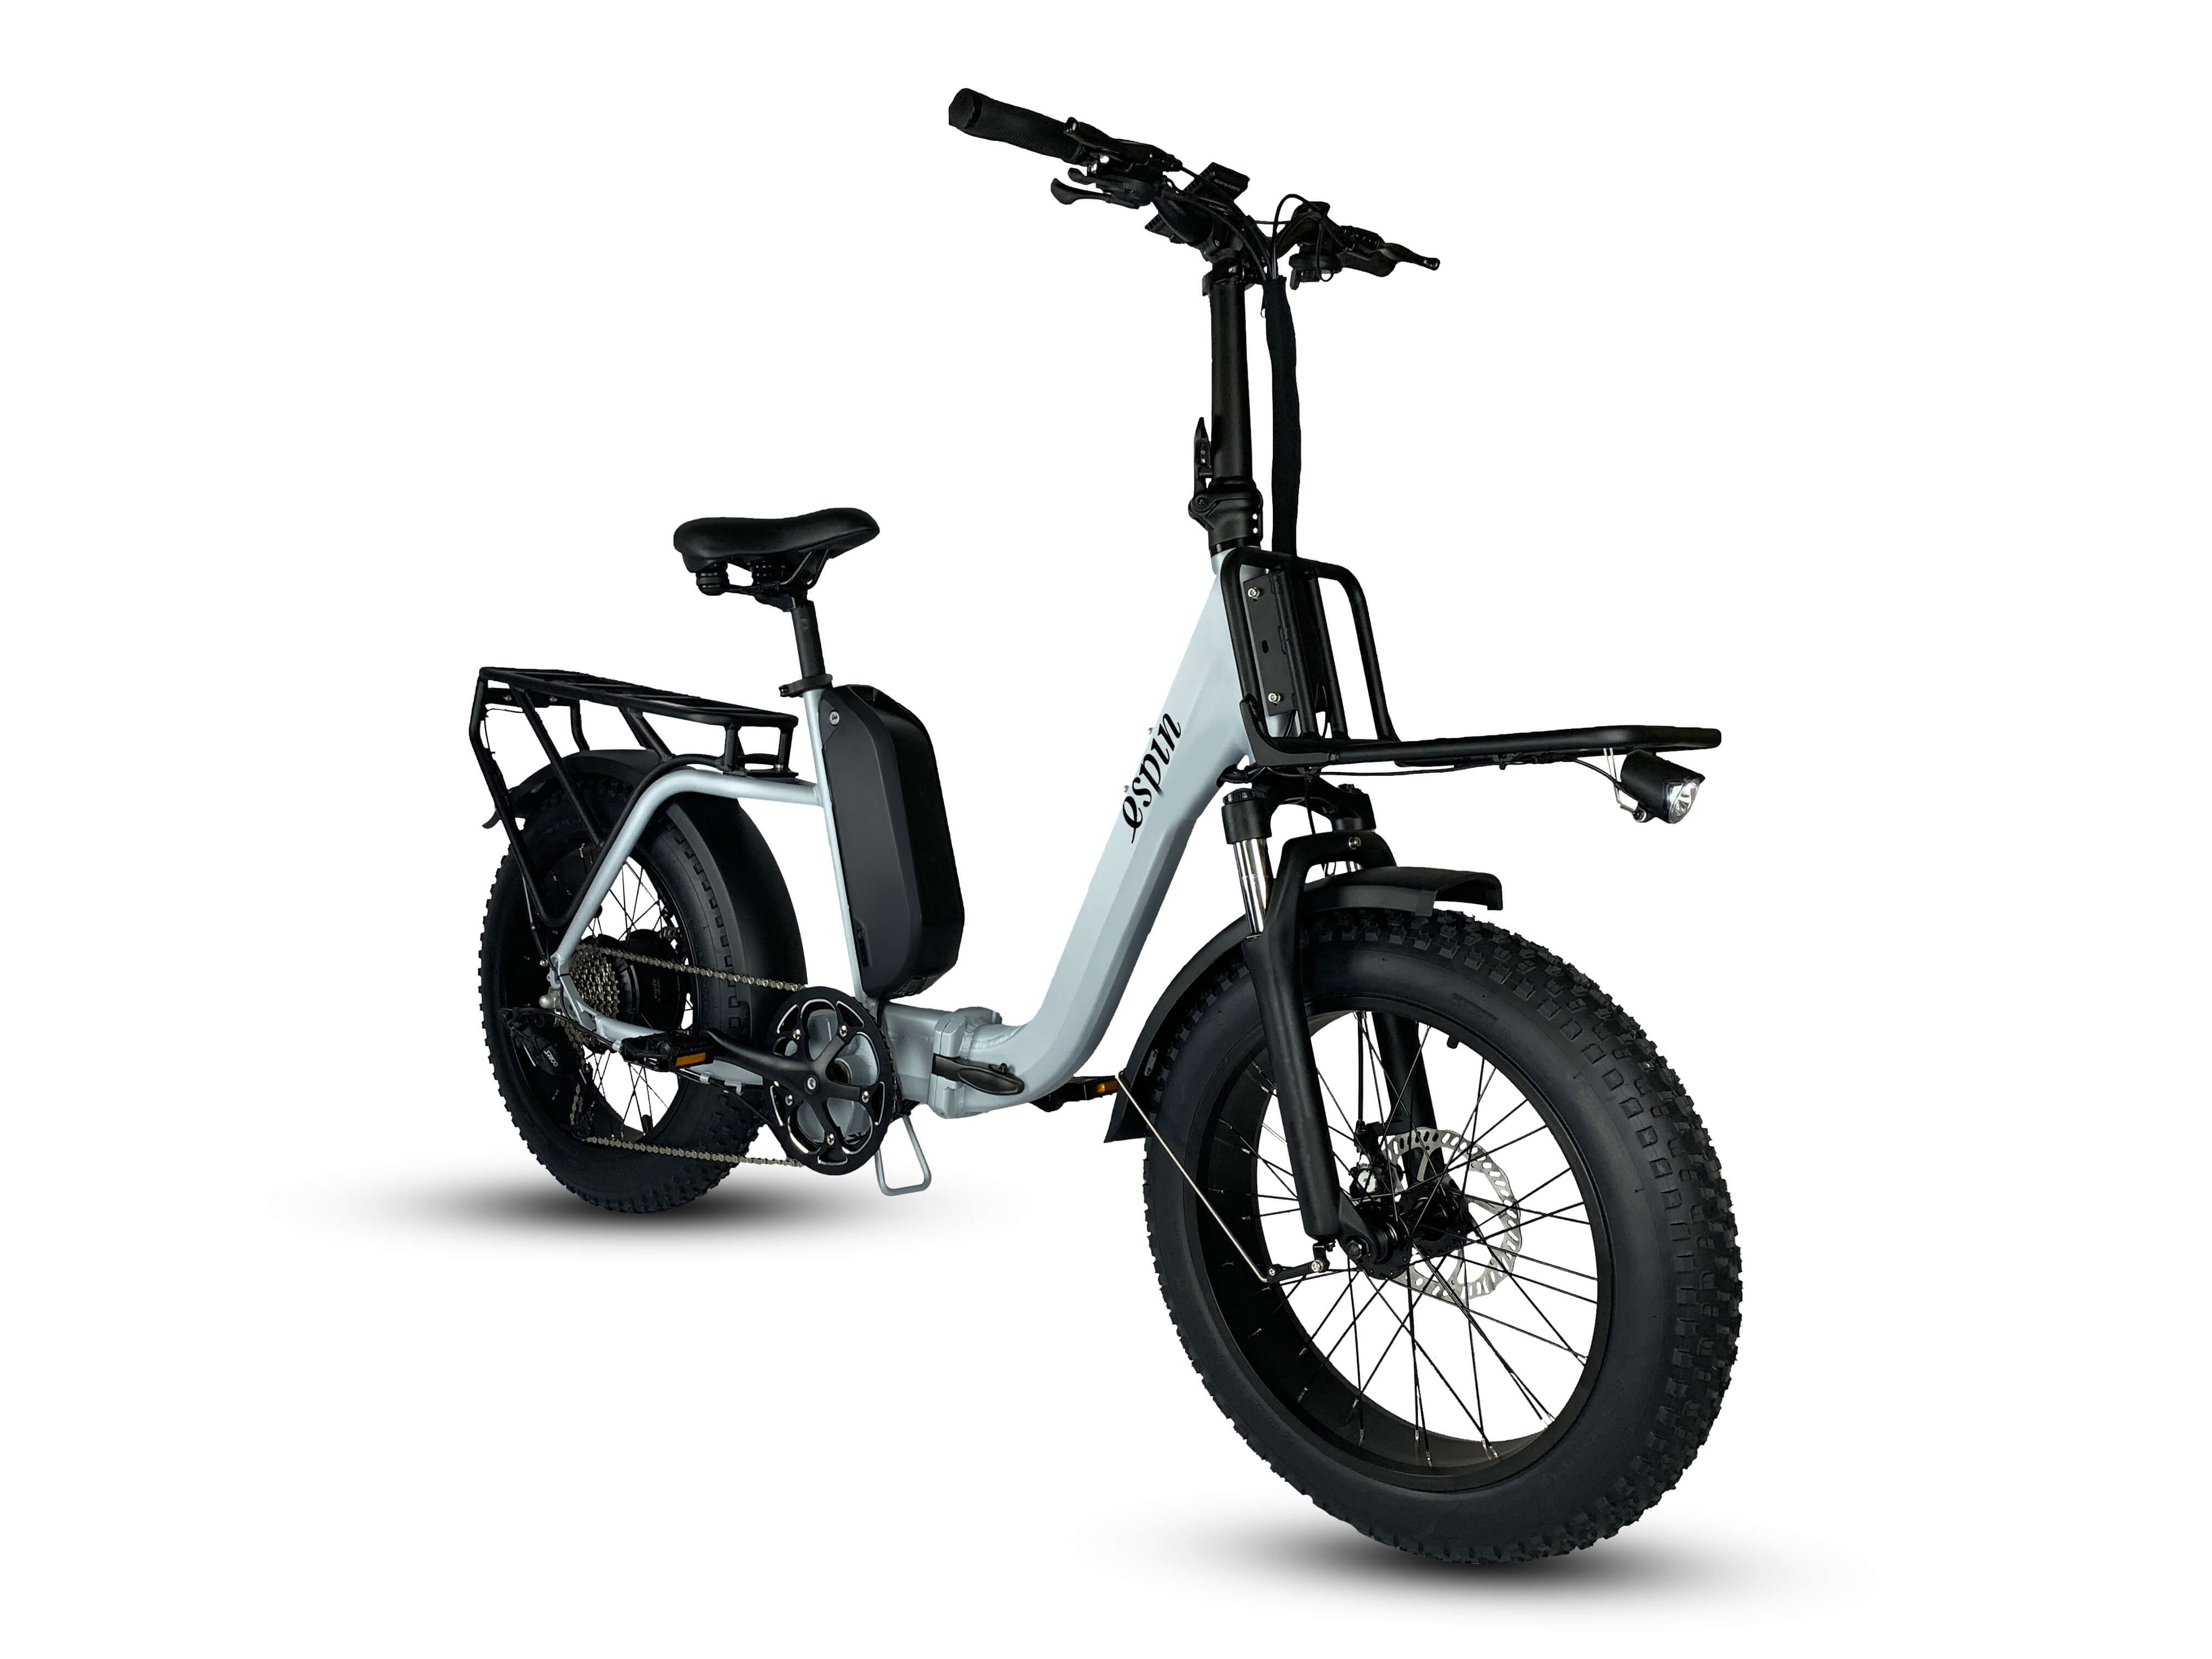 Espin nesta Folding Fat Tire Electric Bike & City Bicycle is equipped with 750W high-speed brushless motor and Lightweight Aluminum eBike Frame